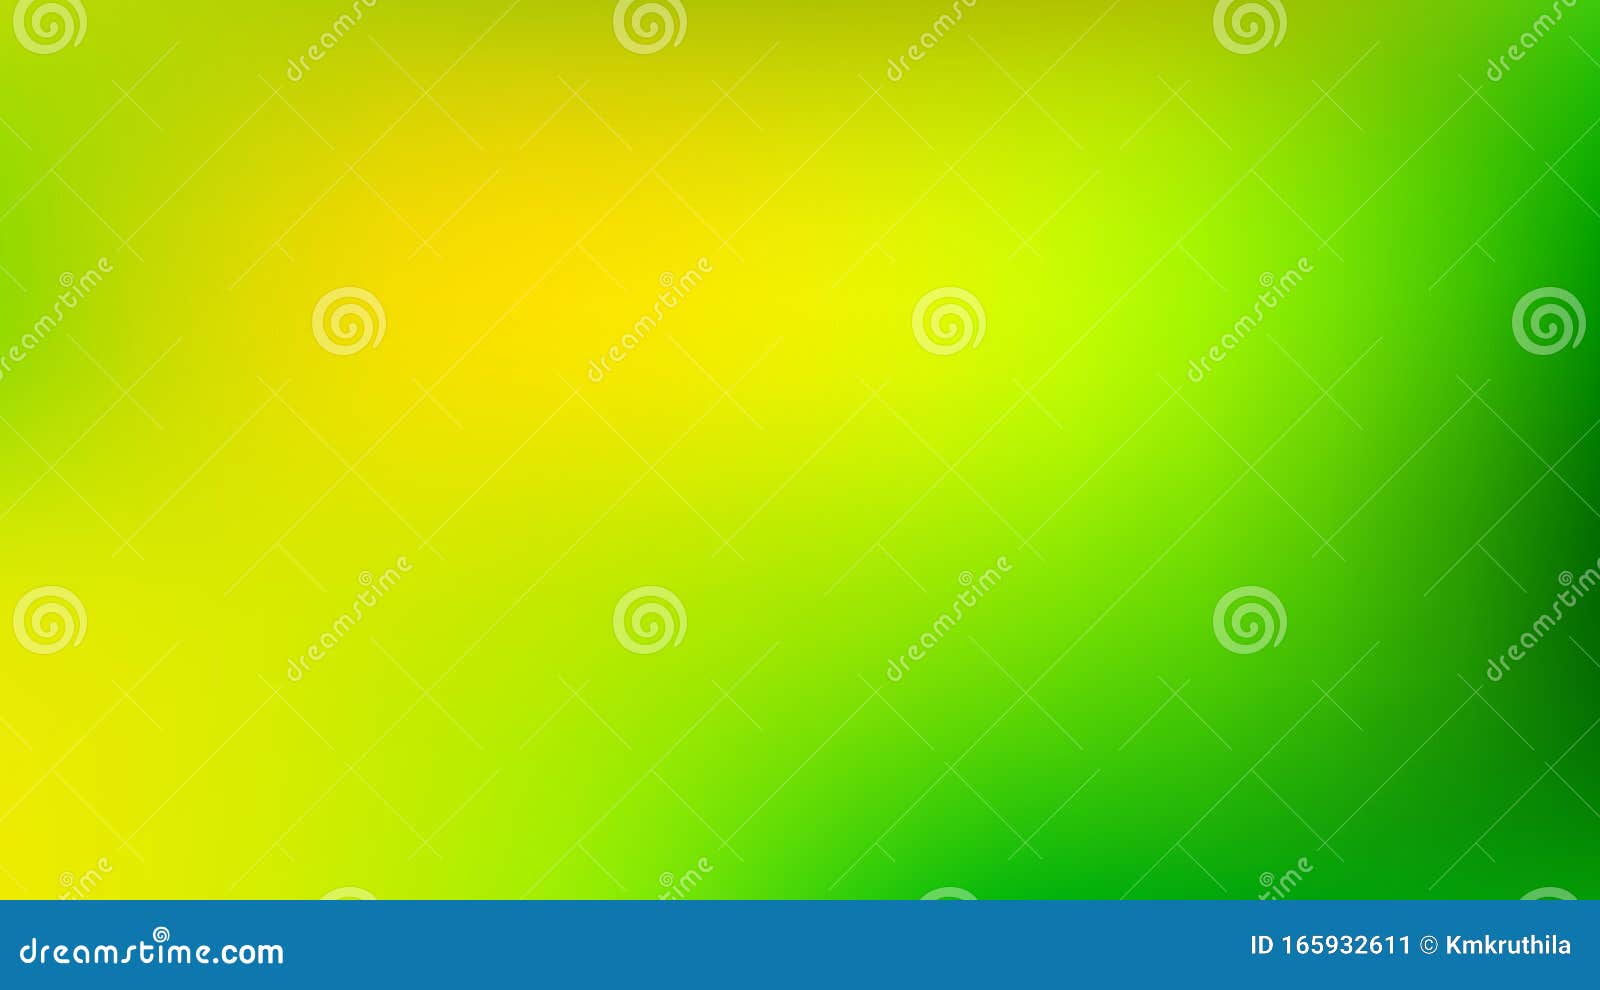 Green and Yellow Gaussian Blur Background Stock Vector - Illustration of  font, blurry: 165932611